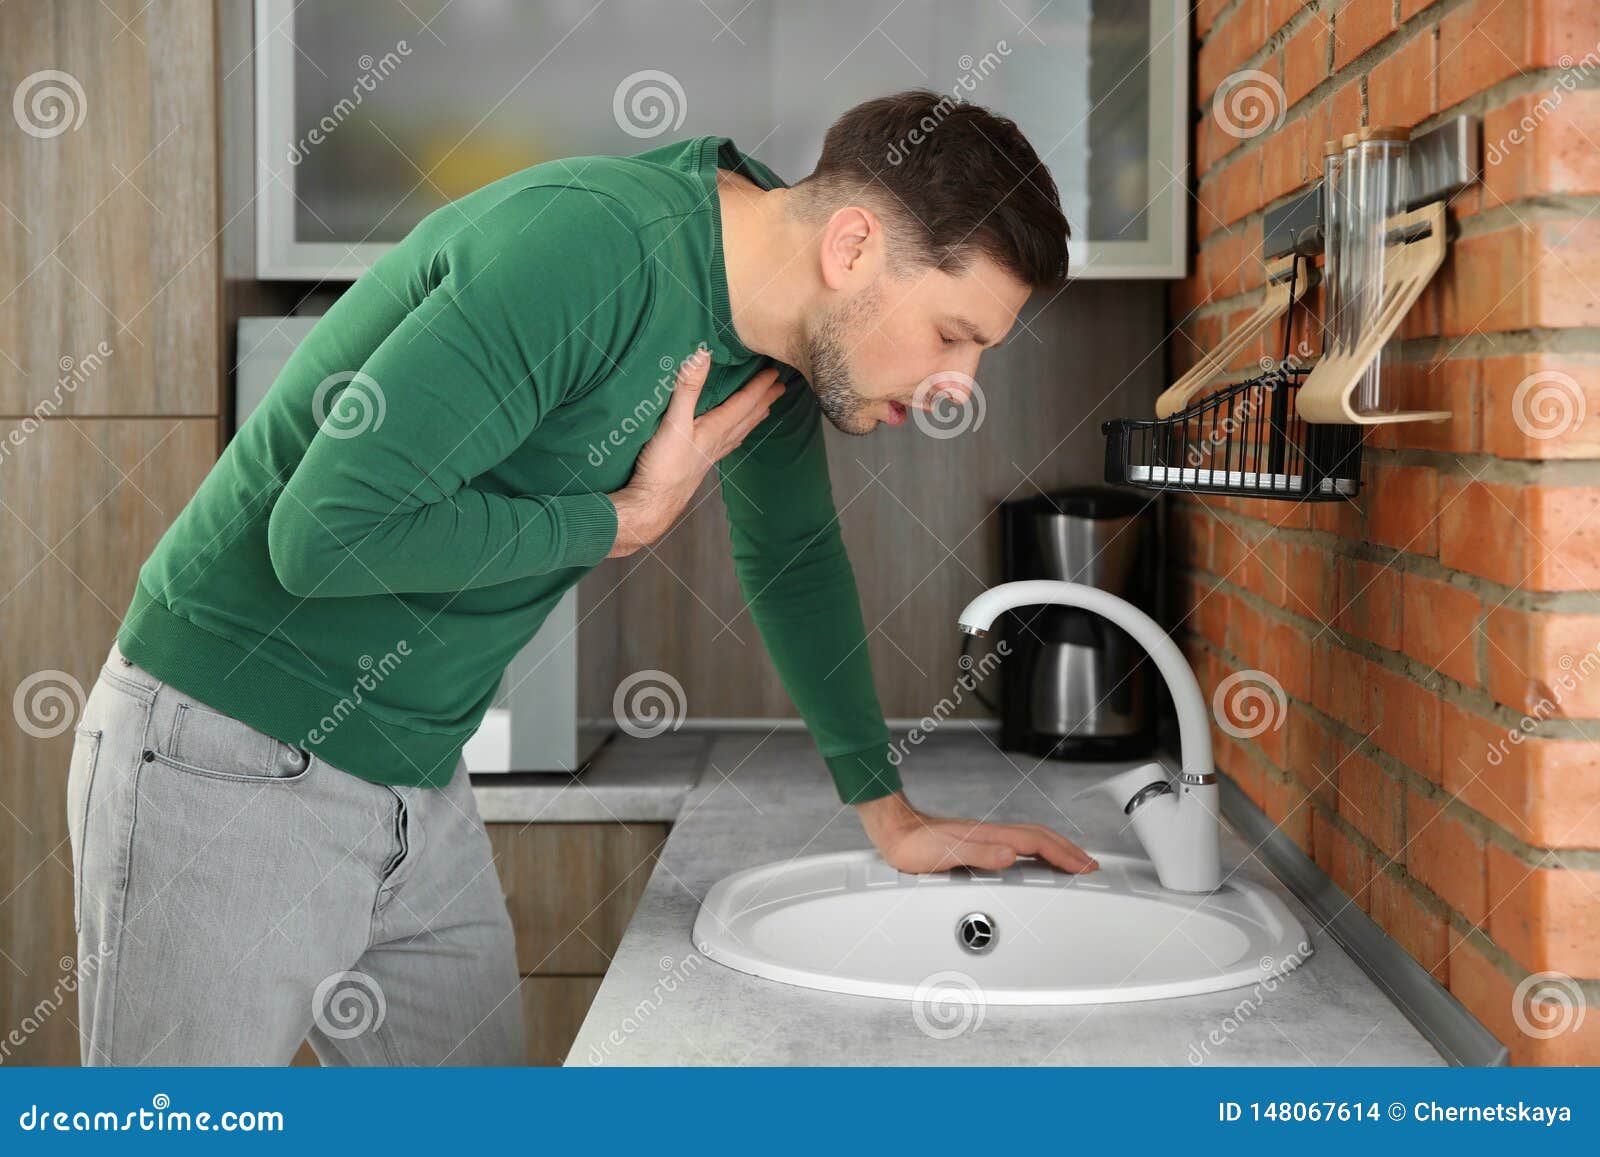 young man having nausea in kitchen